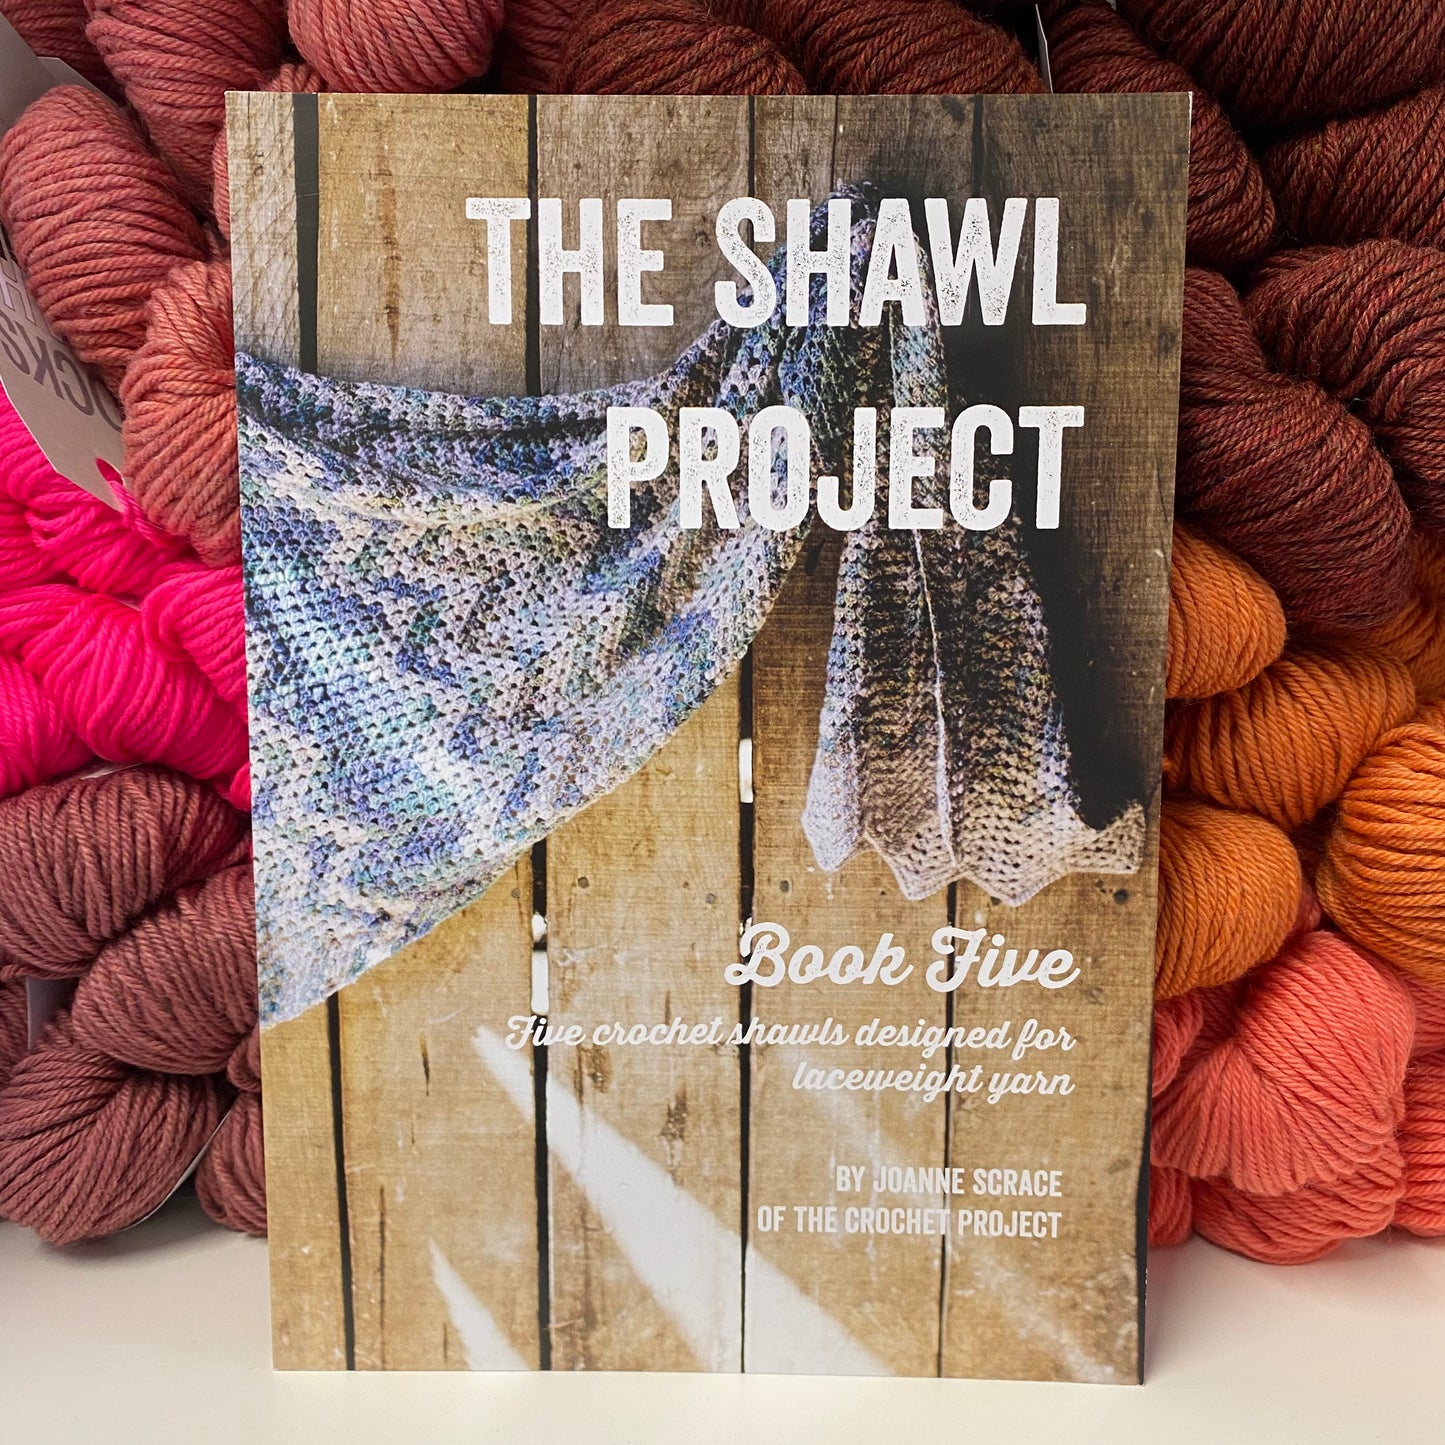 The Crochet Project - The Shawl Project - Book Five